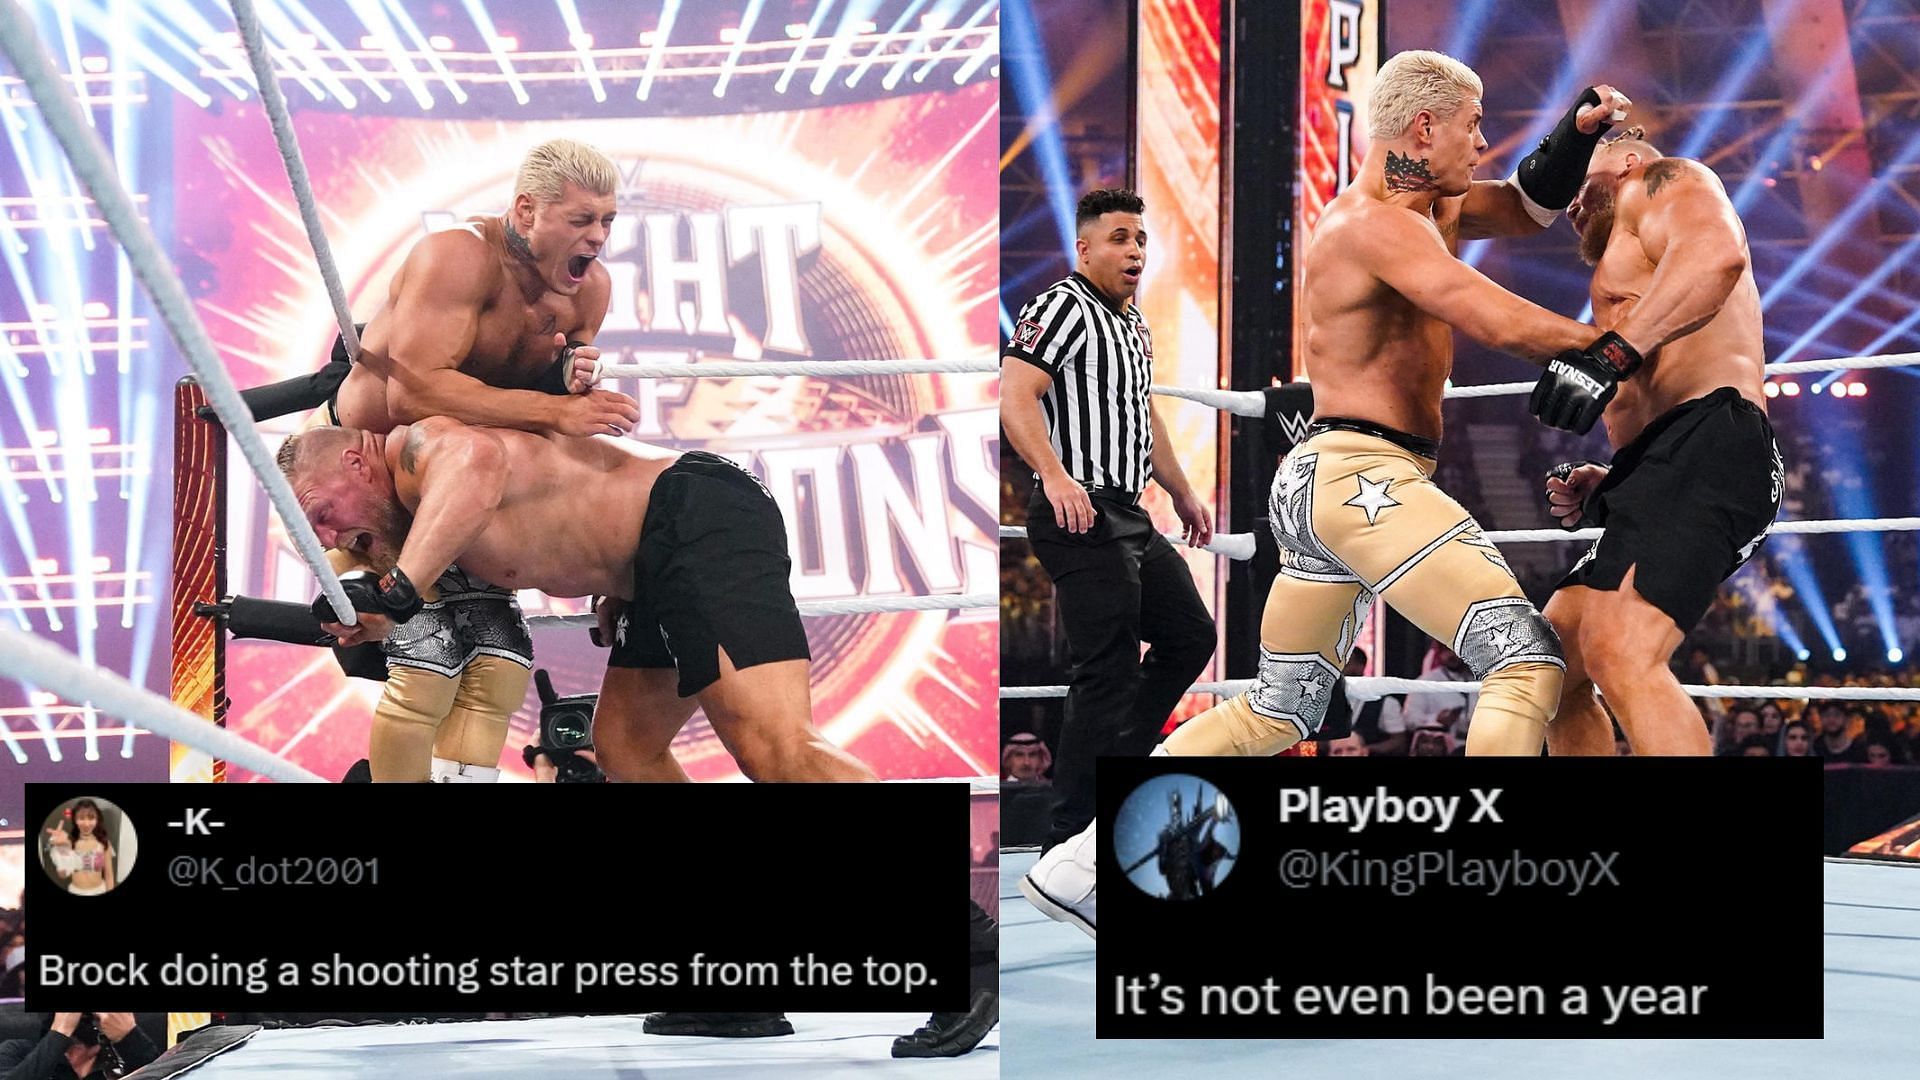 Cody Rhodes and Brock Lesnar are currently in a feud